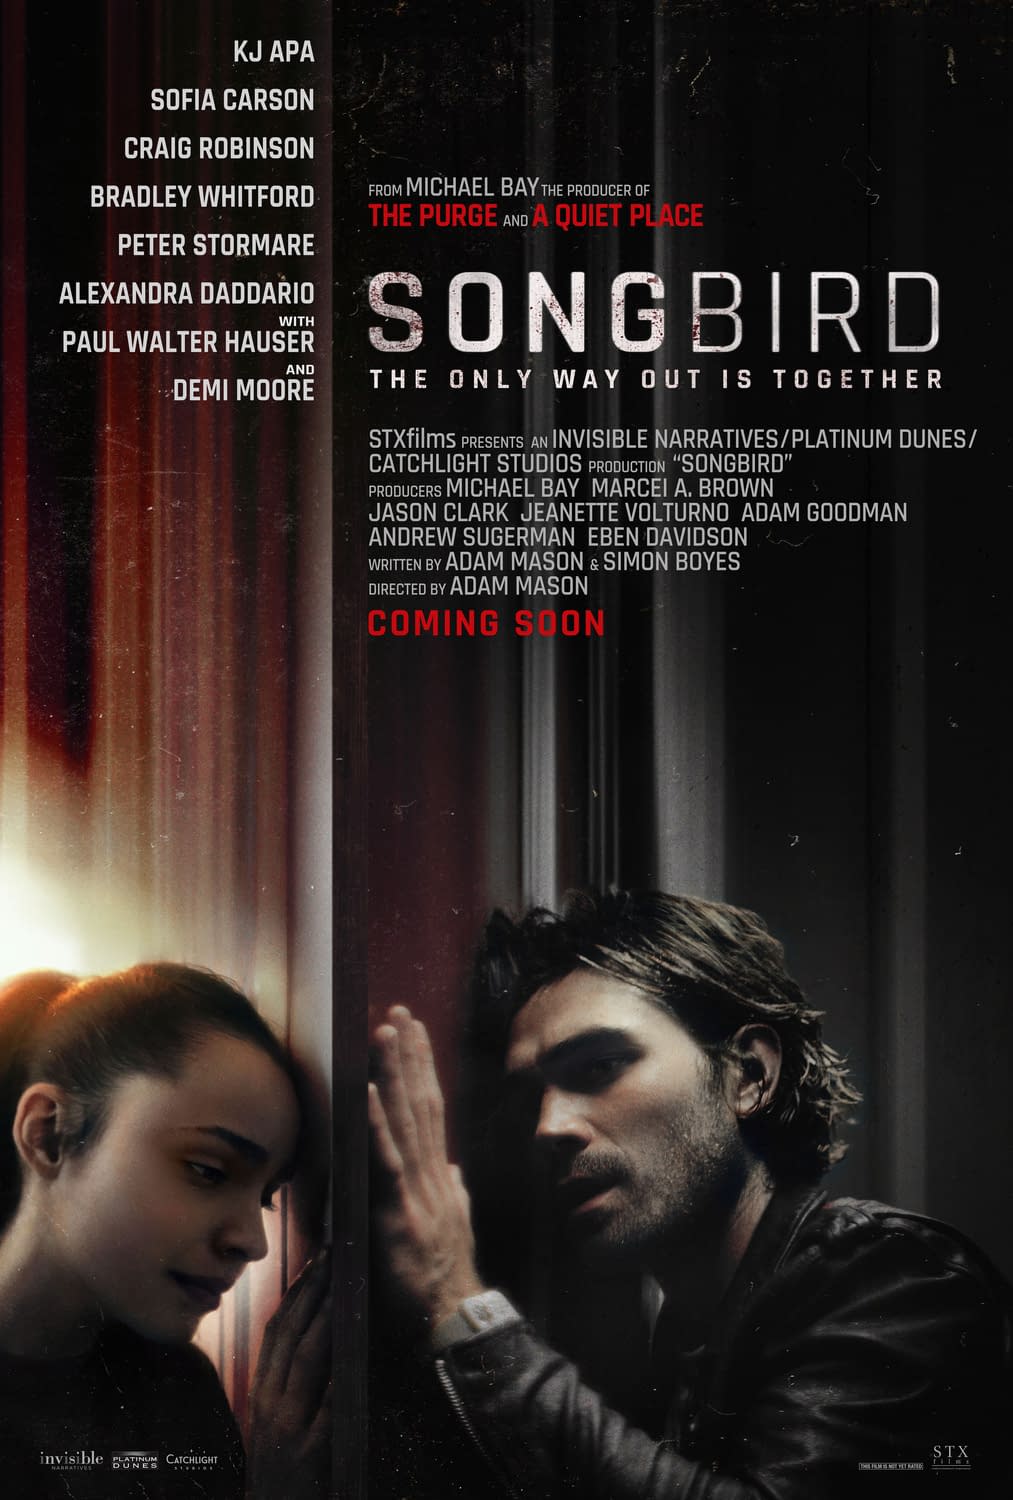 Songbird Hits PVOD Services On December 11th